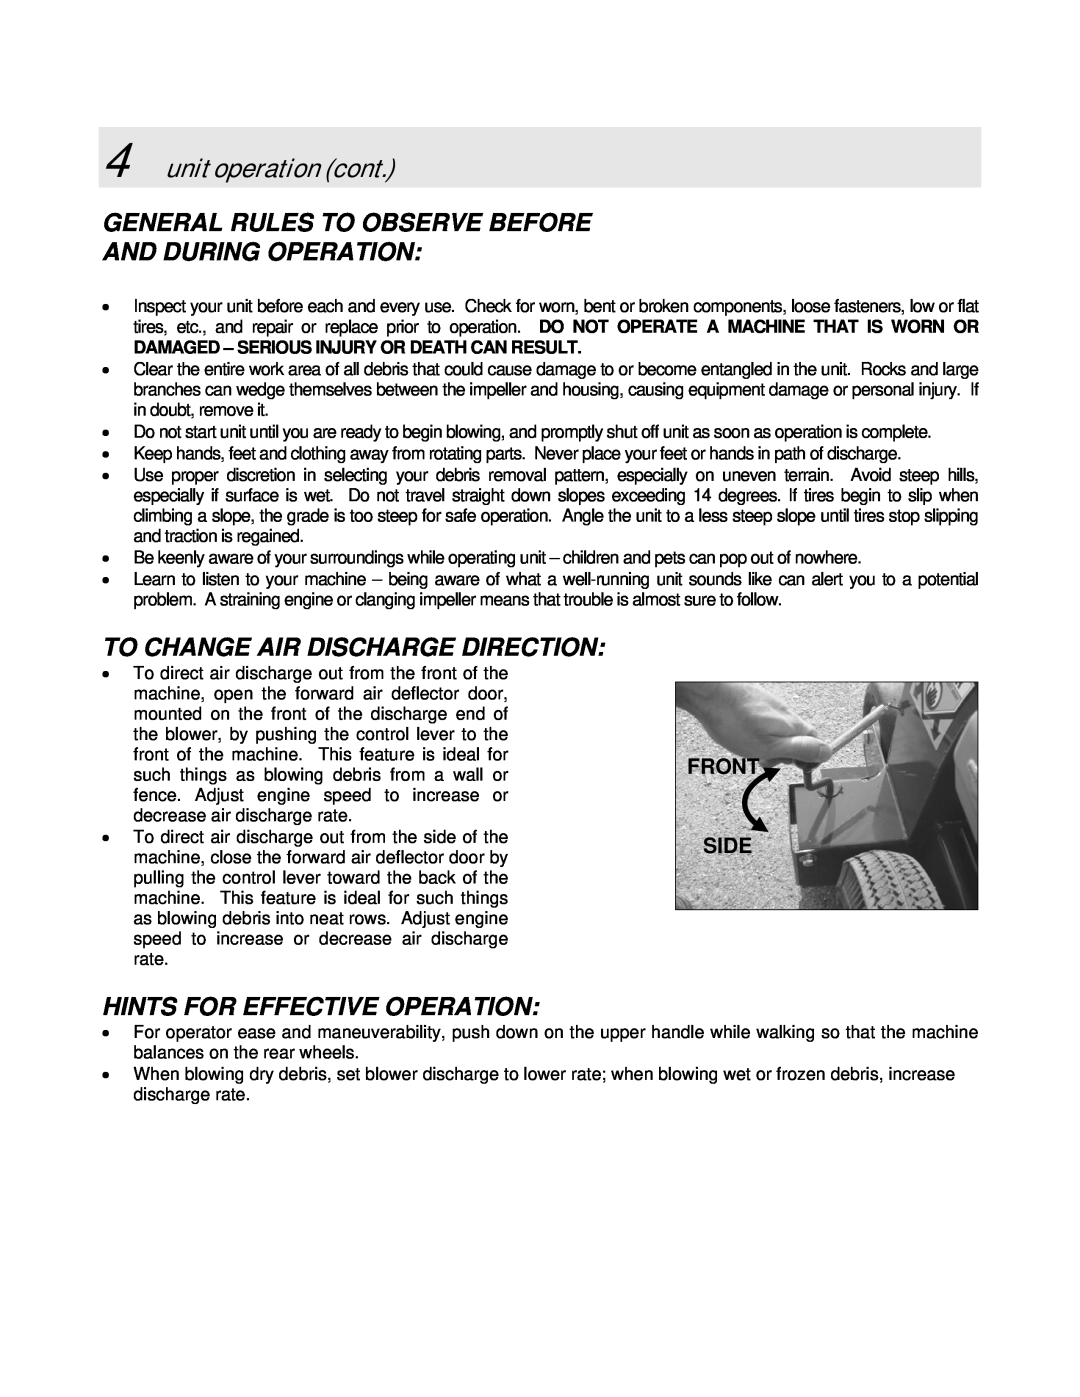 Snapper SLBC55151BV General Rules To Observe Before, And During Operation, To Change Air Discharge Direction, Front Side 